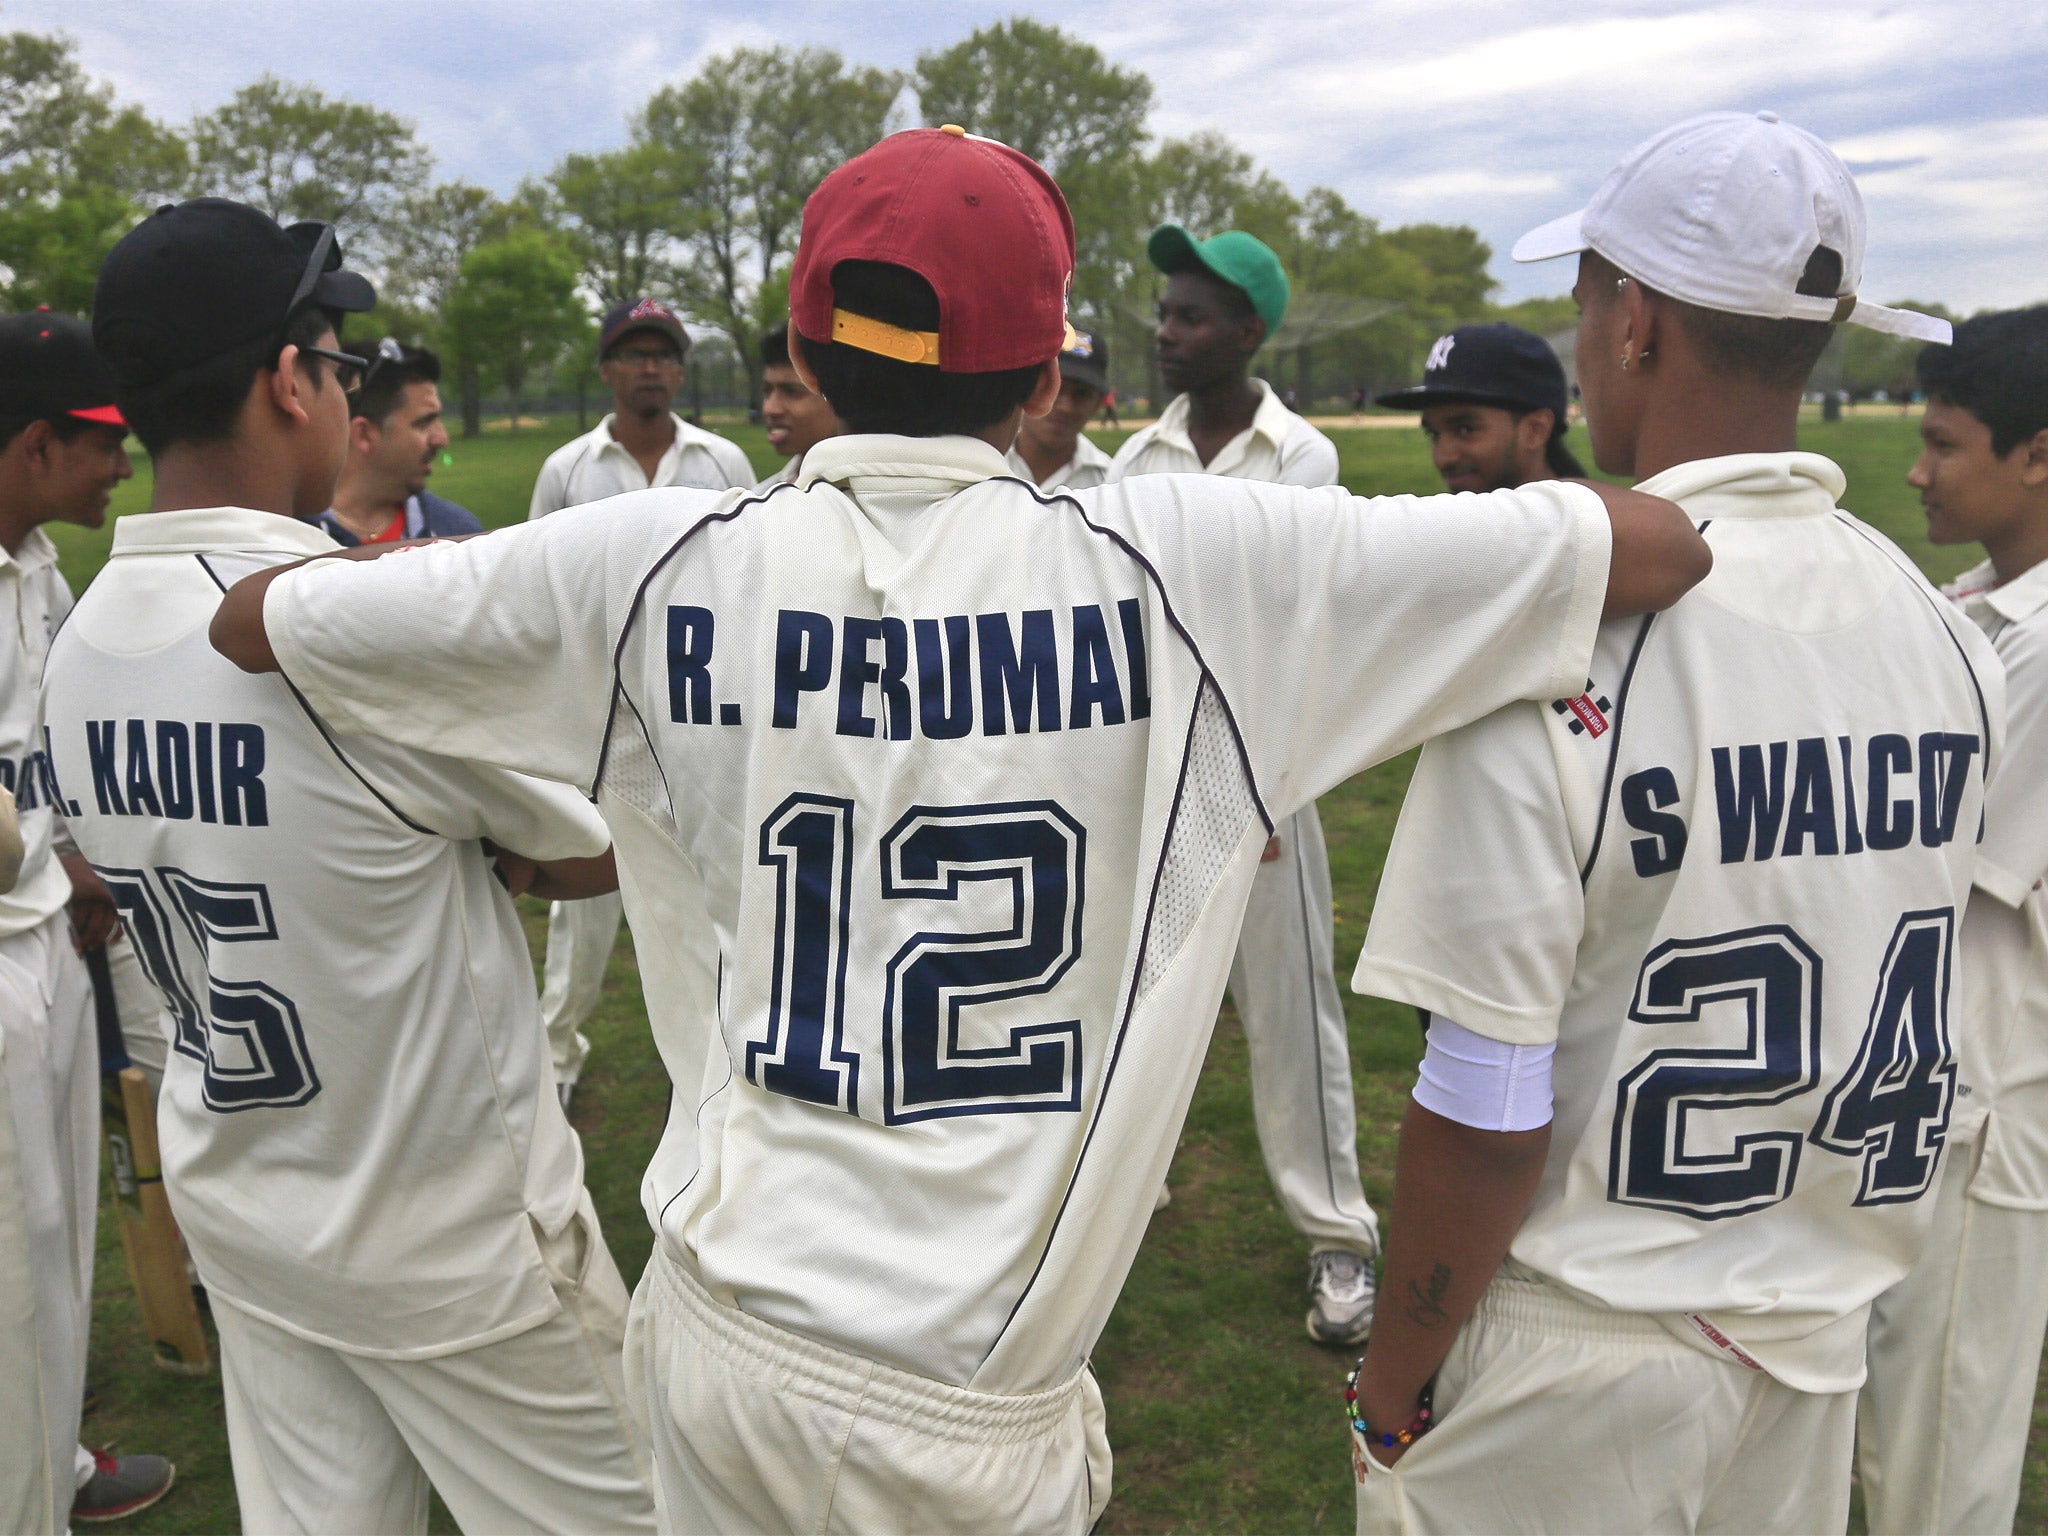 There are now some 30,000 cricketers in the US, as shown here in Brooklyn, New York